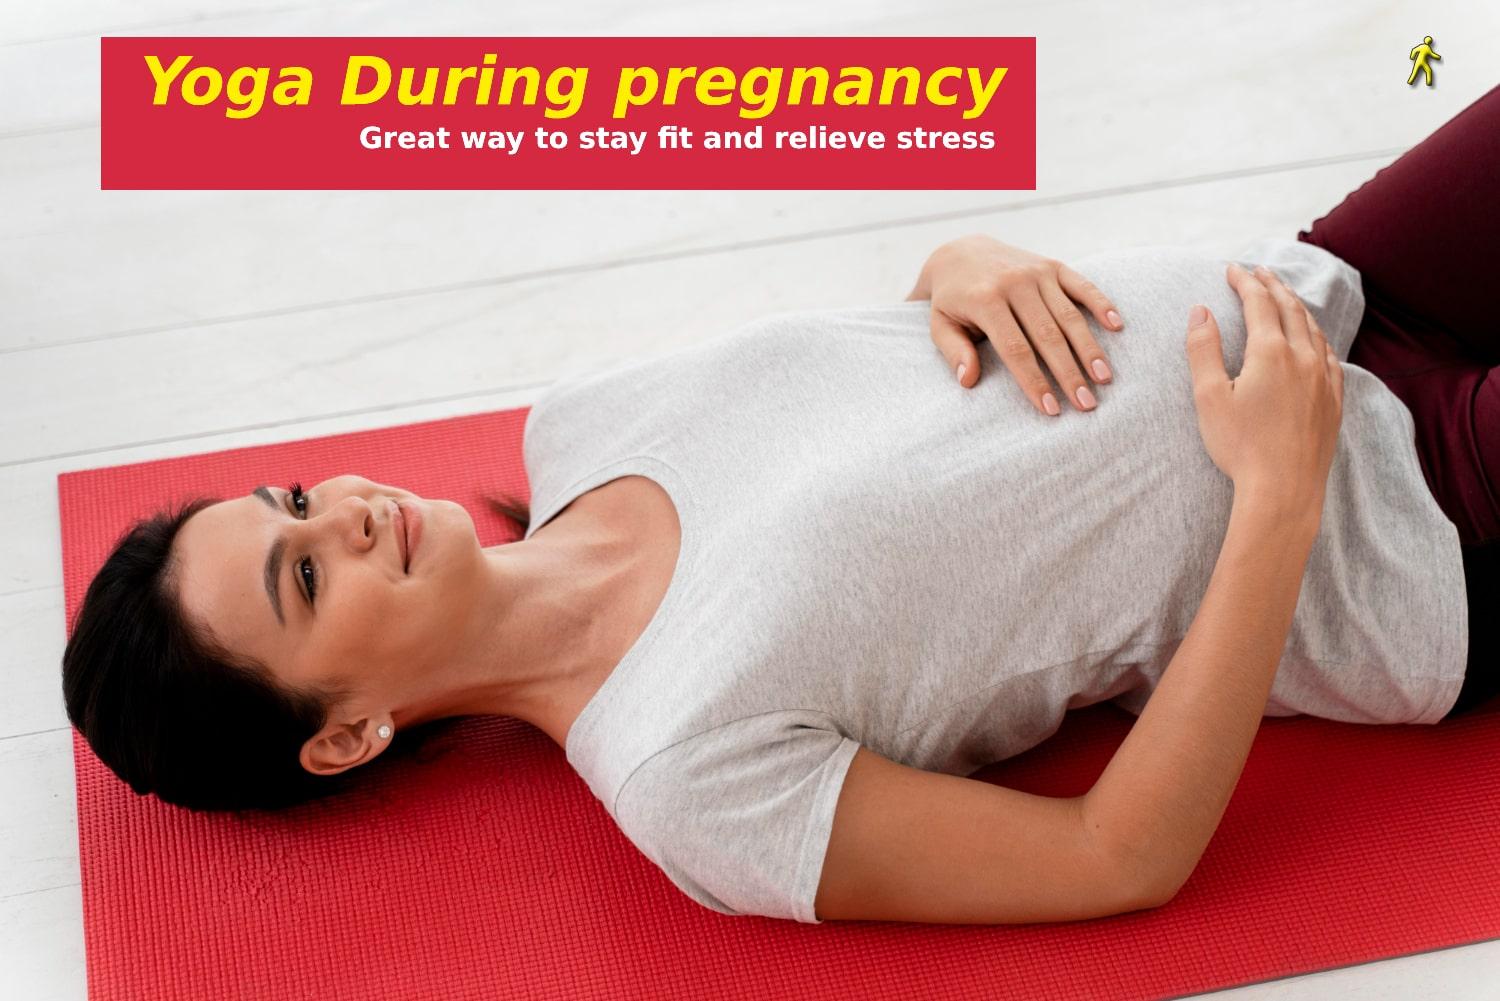 What are the benefits of Yoga for pregnancy?